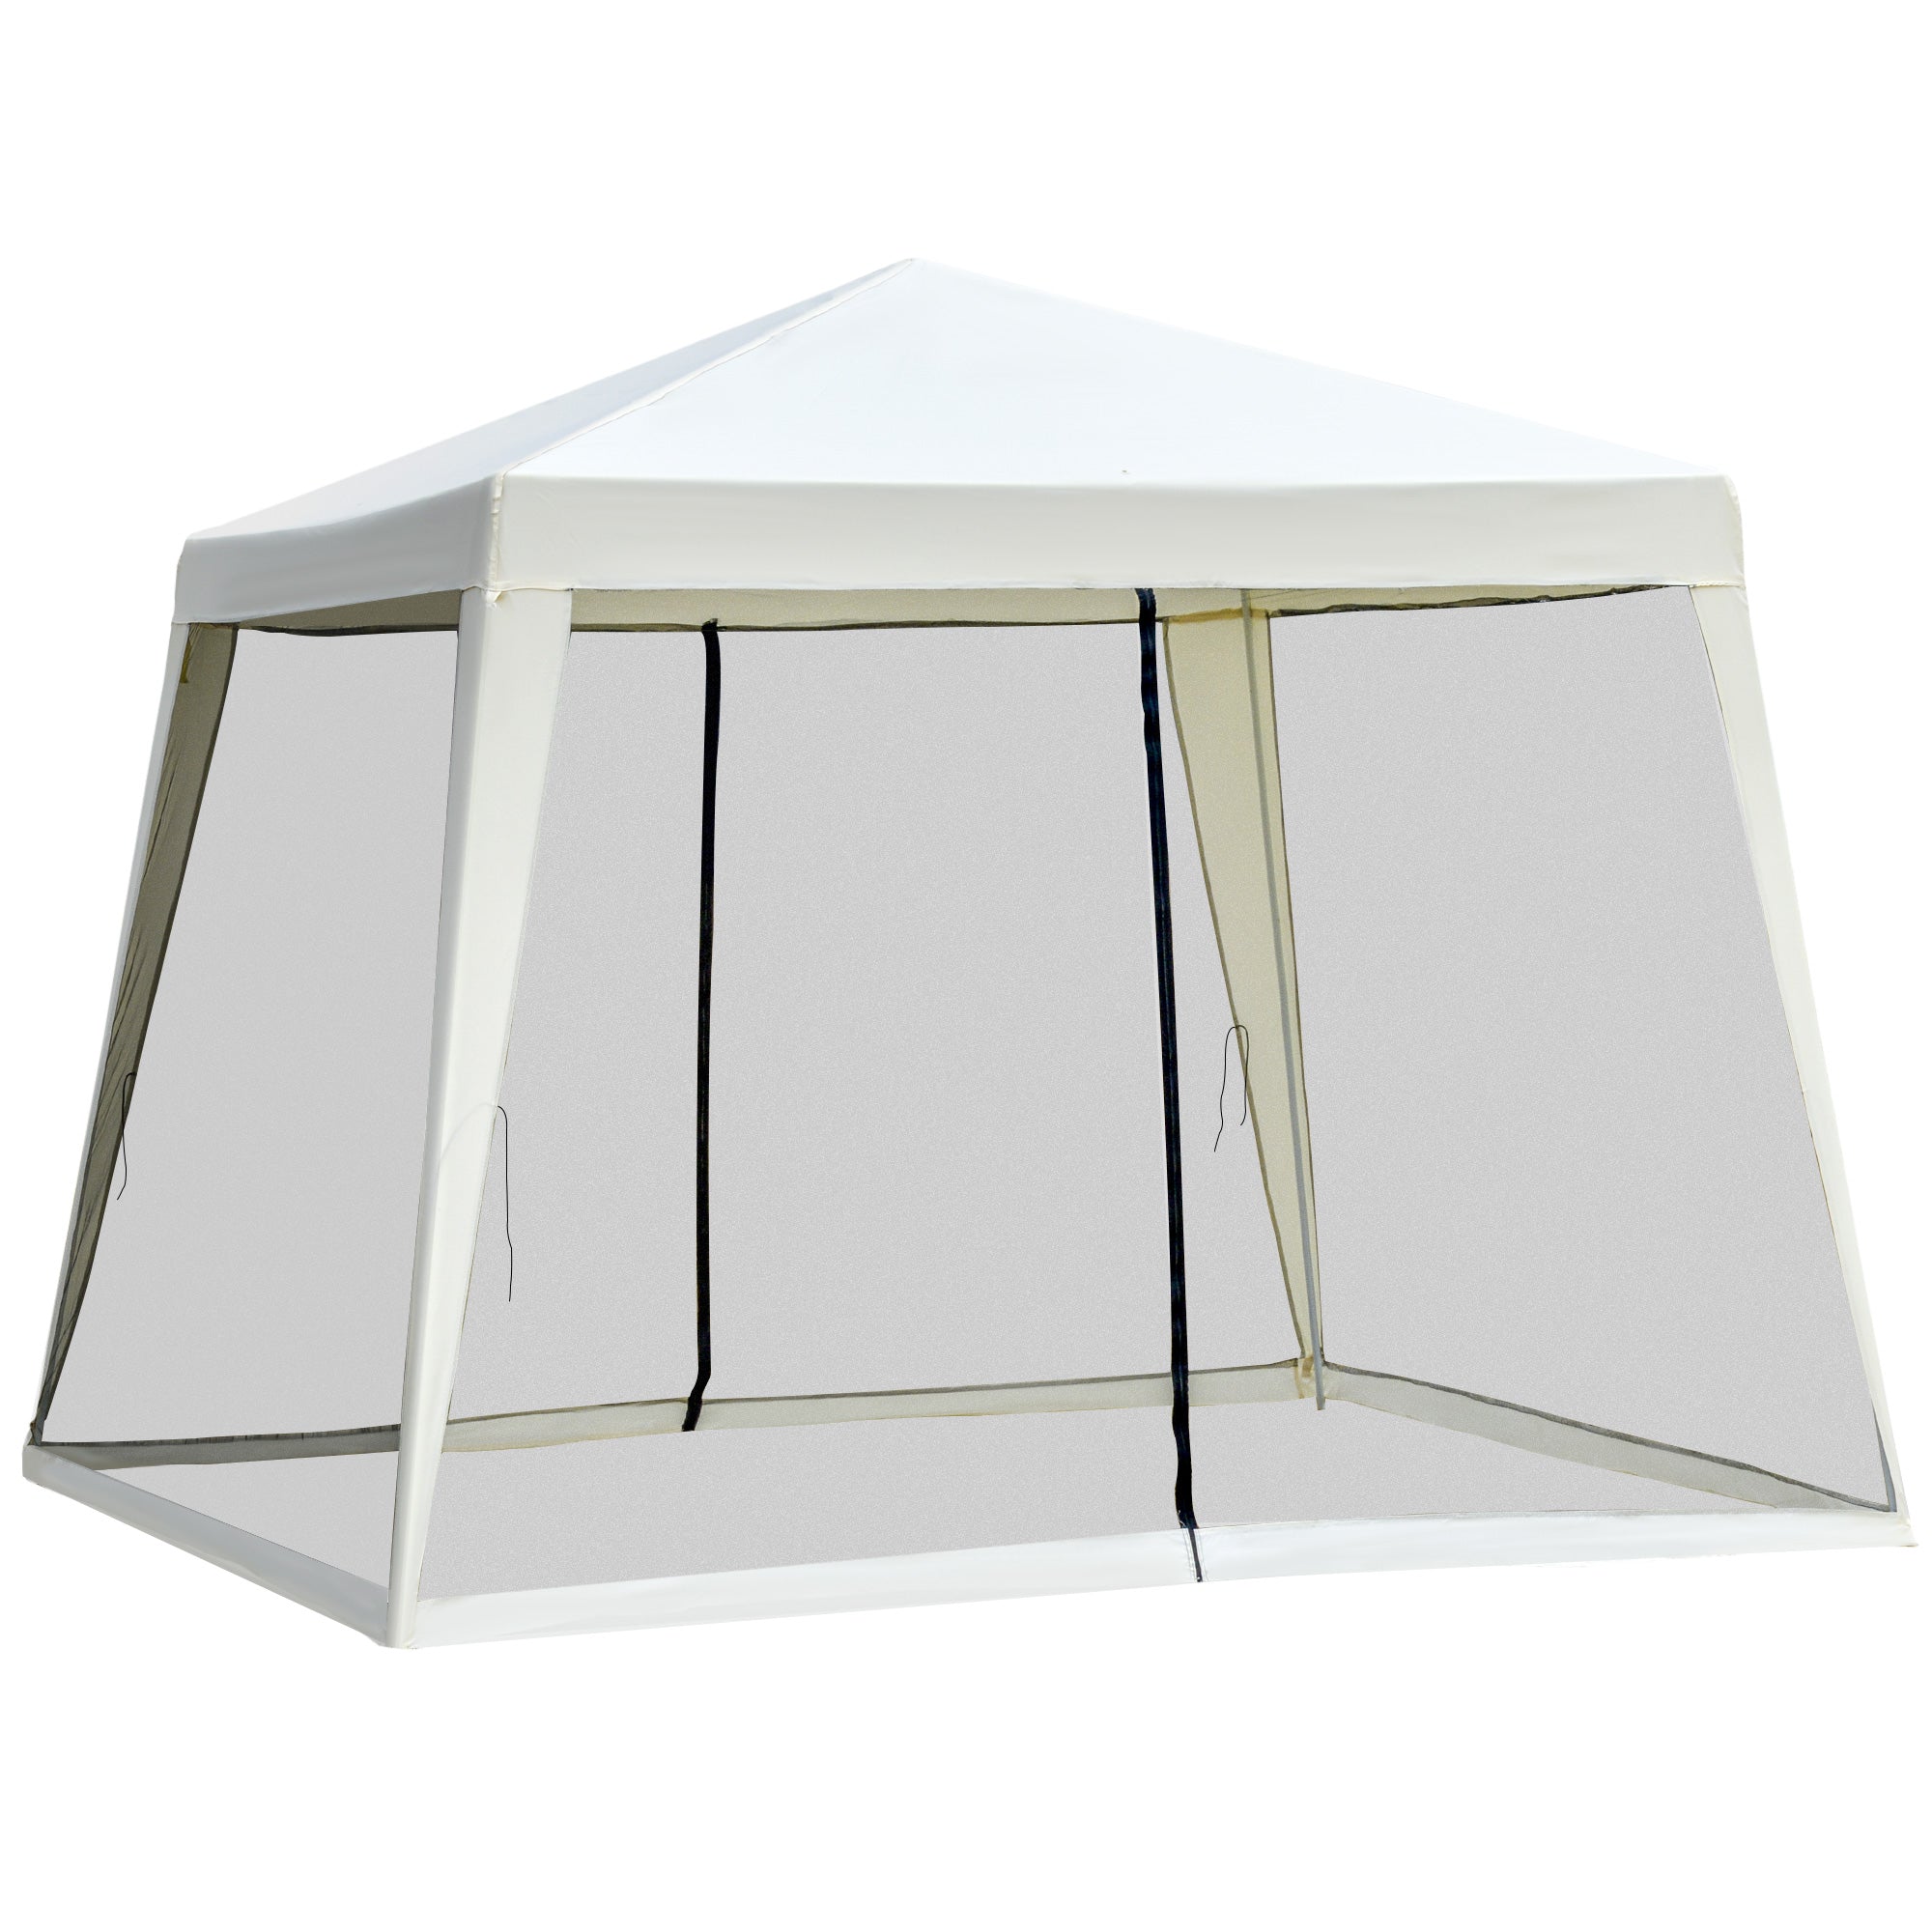 Outsunny 3x3m Outdoor Gazebo Canopy Tent Event Shelter w/ Mesh Screen Side White  | TJ Hughes